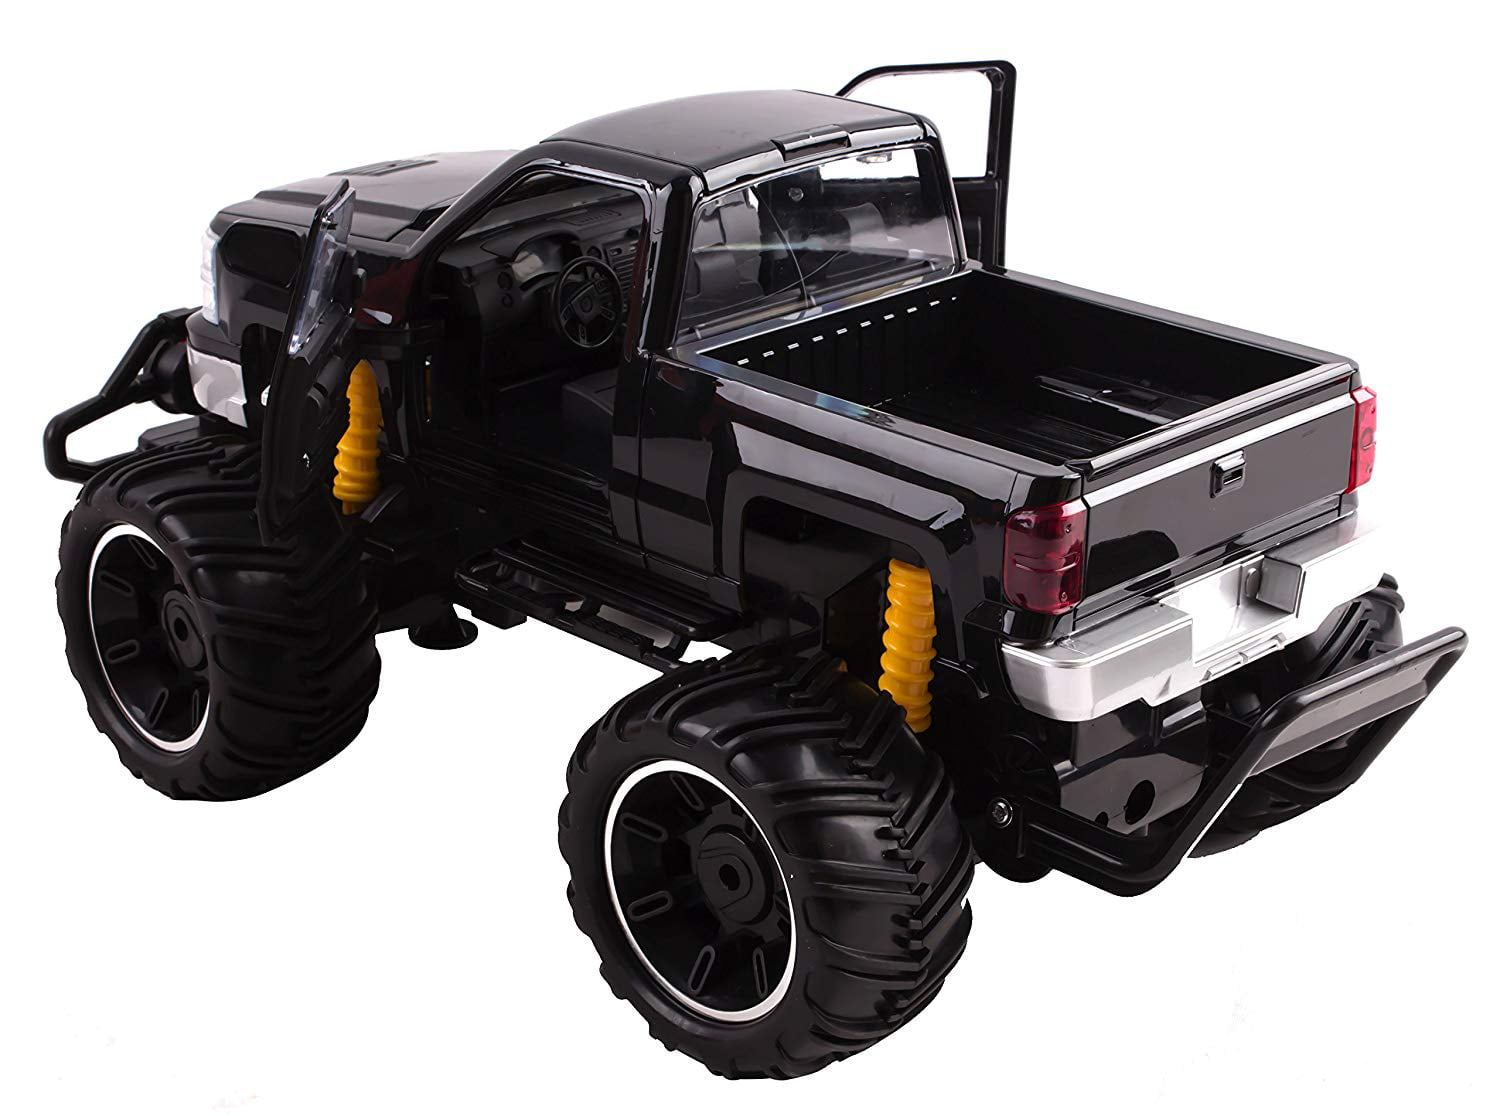 RC4WD UK SMOKING SHARK Monster Truck Large Remote Control RC 4WD Big Wheel Toy Car RTR 